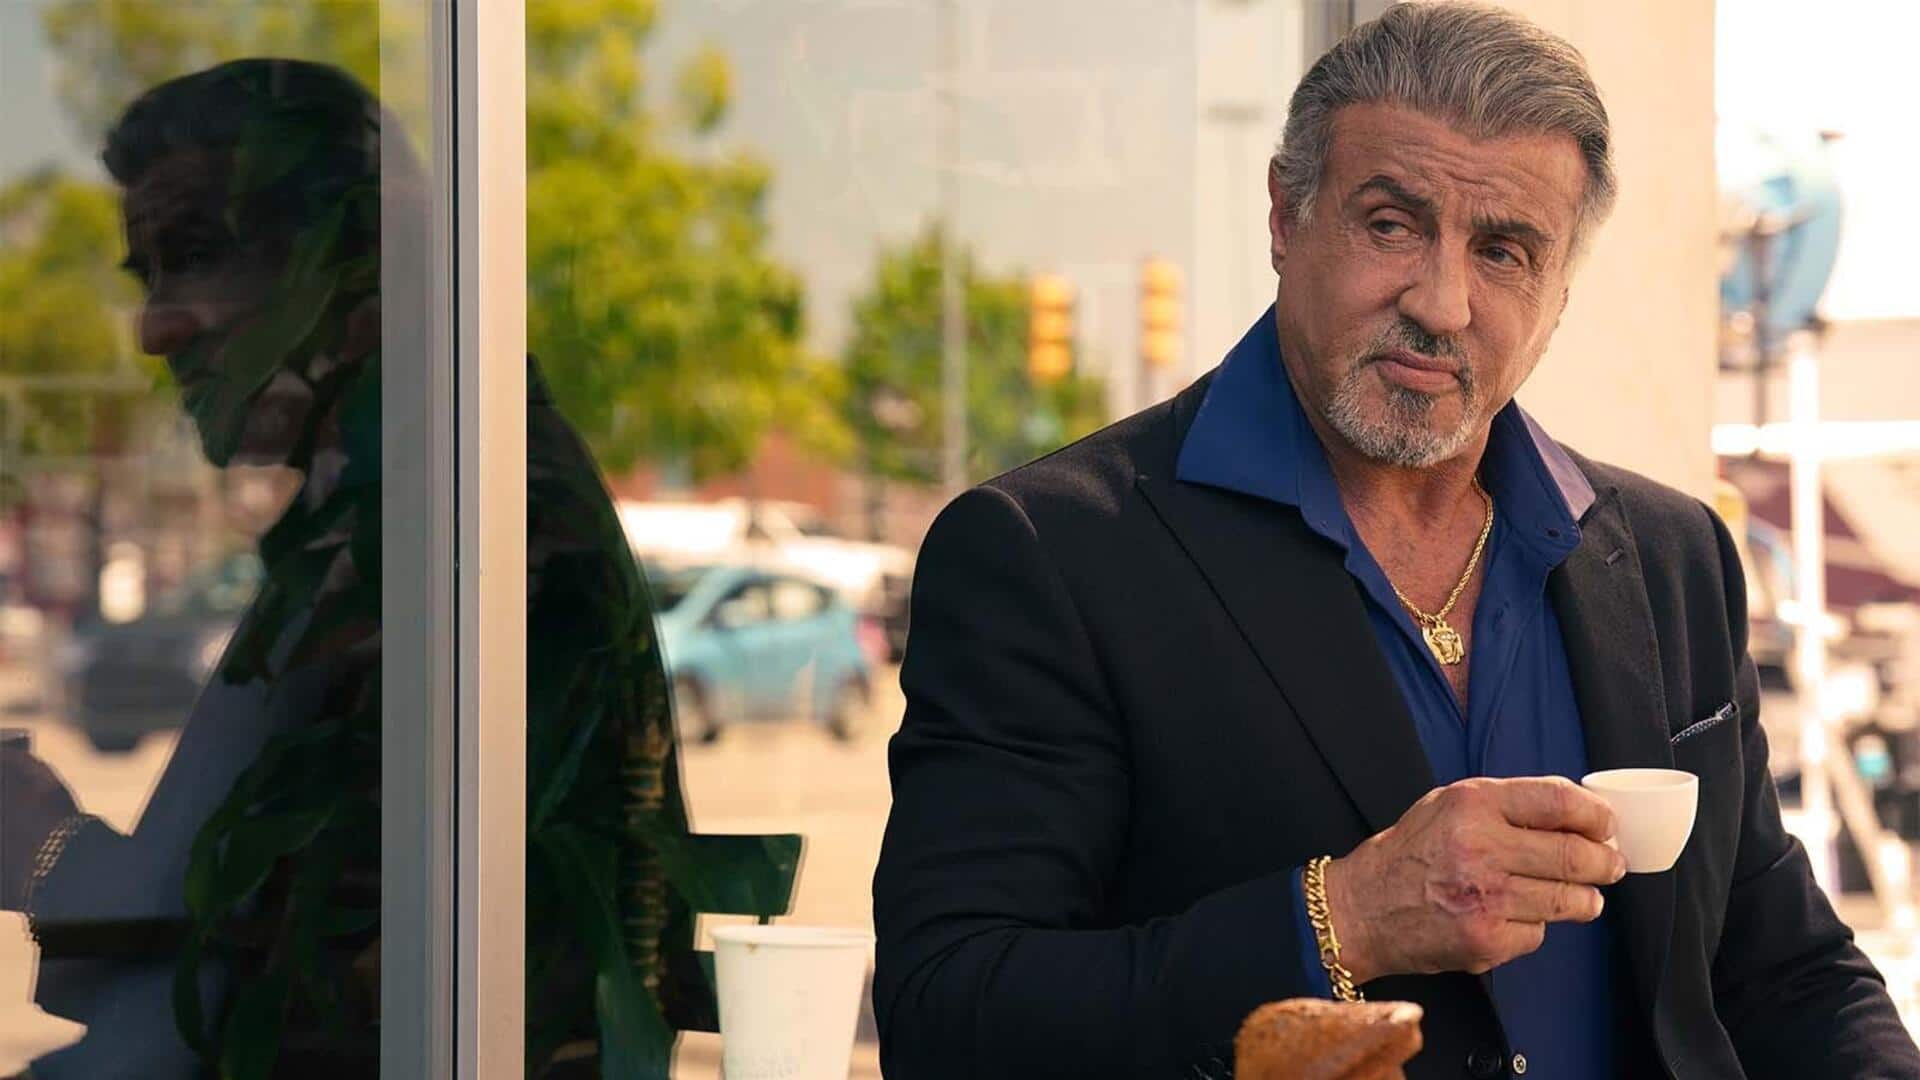 Alleged on-set abuse: Casting agency exits Sylvester Stallone's 'Tulsa King' 